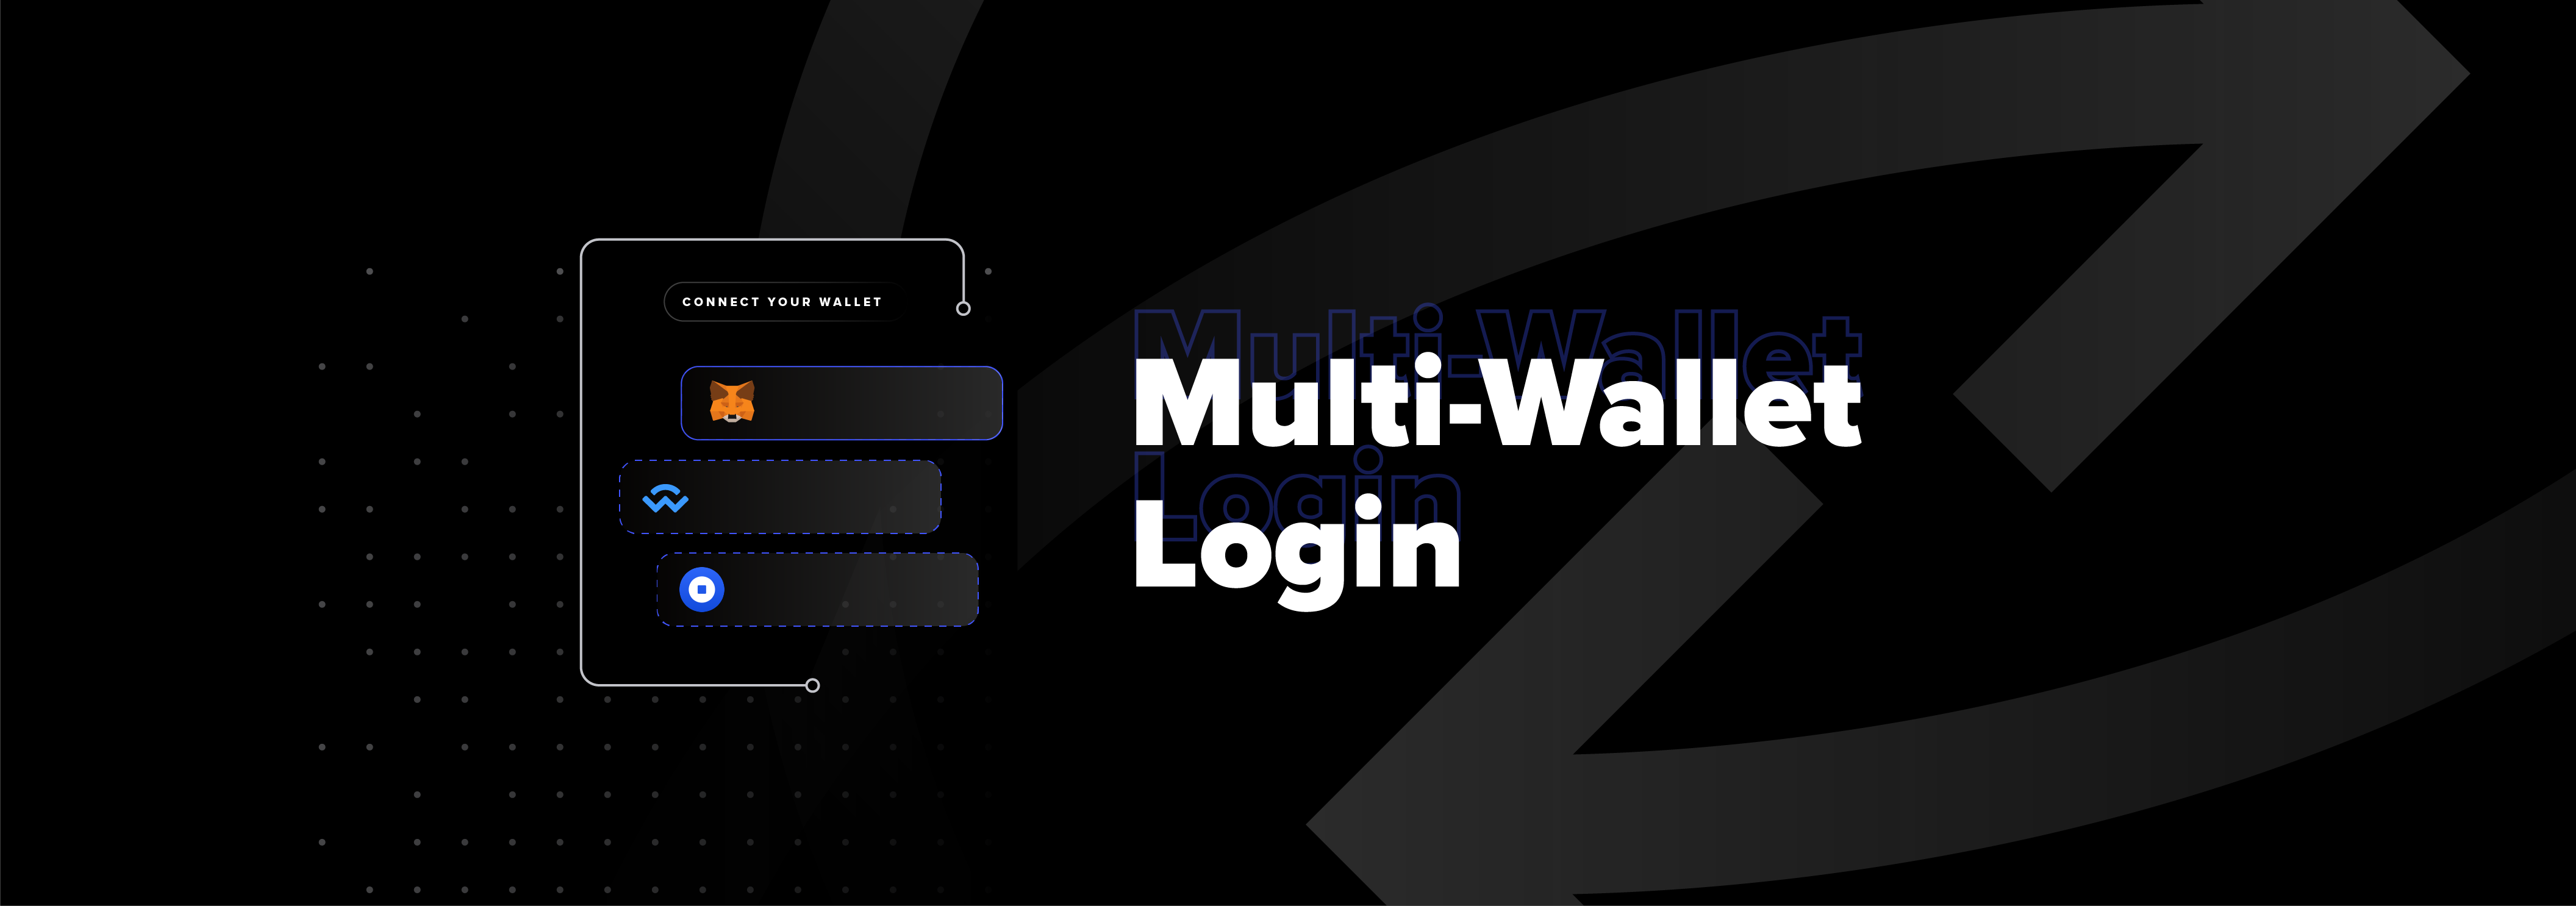 Introducing Multi-Wallet Login. Now you can connect to the ...